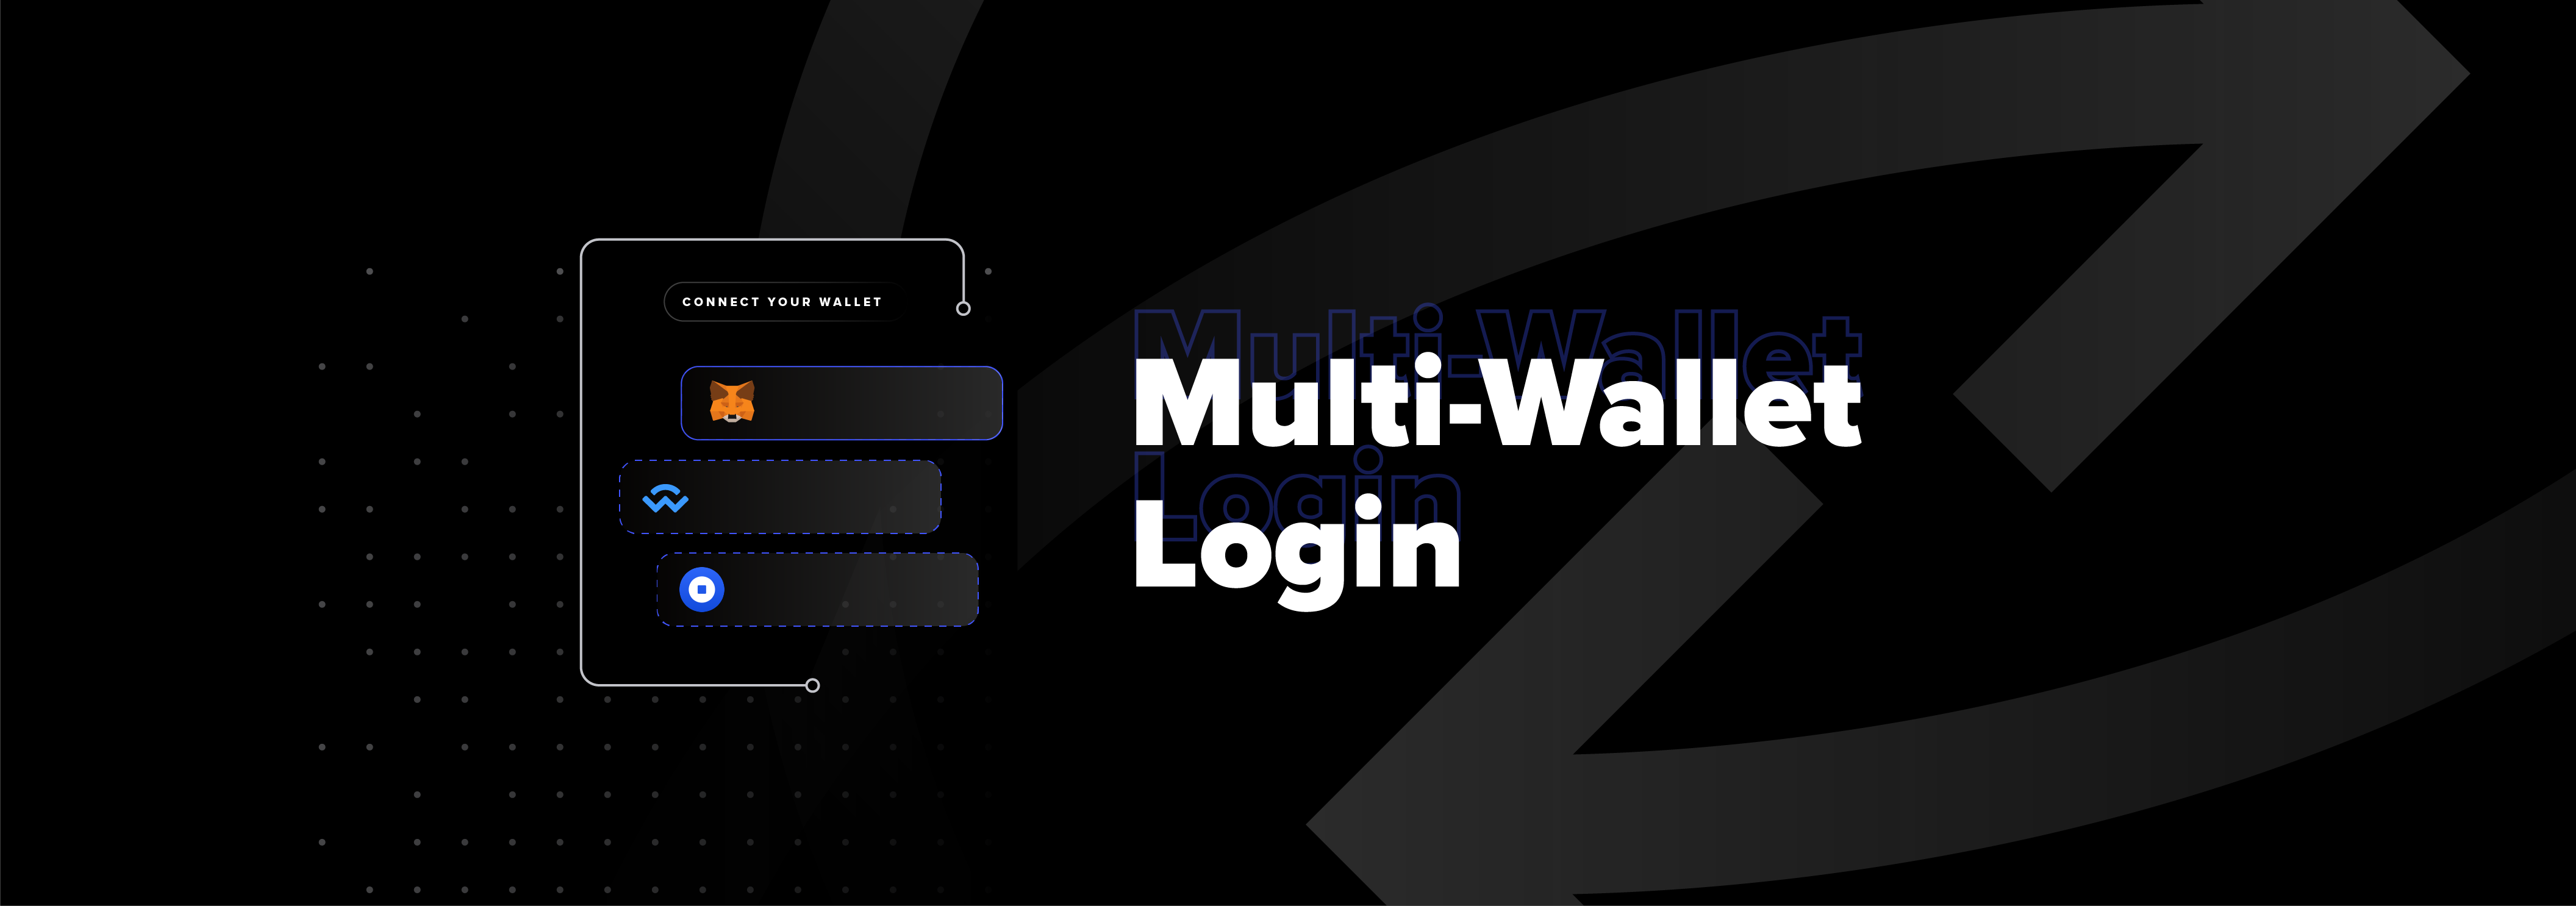 Introducing Multi-Wallet Login. Now you can connect to the ...